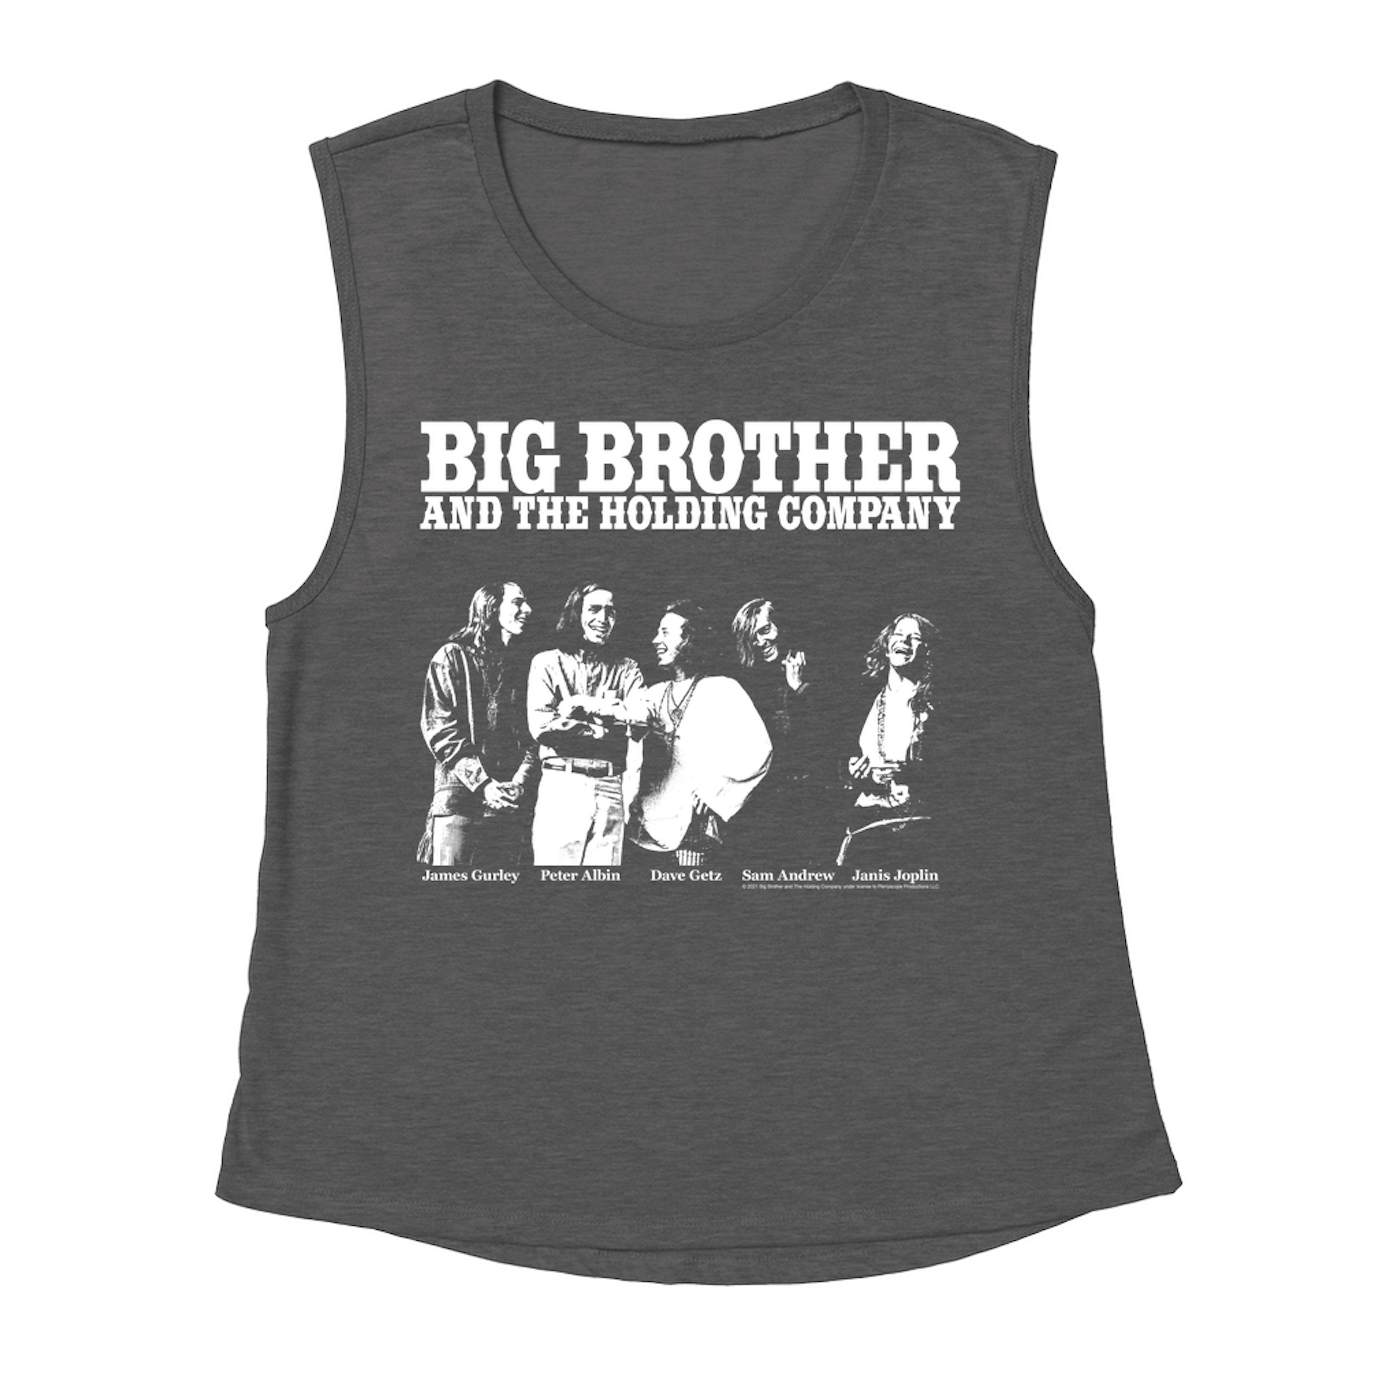 Big Brother & The Holding Company Big Brother and The Holding Co. Ladies' Muscle Tank Top | Featuring Janis Joplin Black and White Photo Big Brother and The Holding Co. Shirt (Merchbar Exclusive)